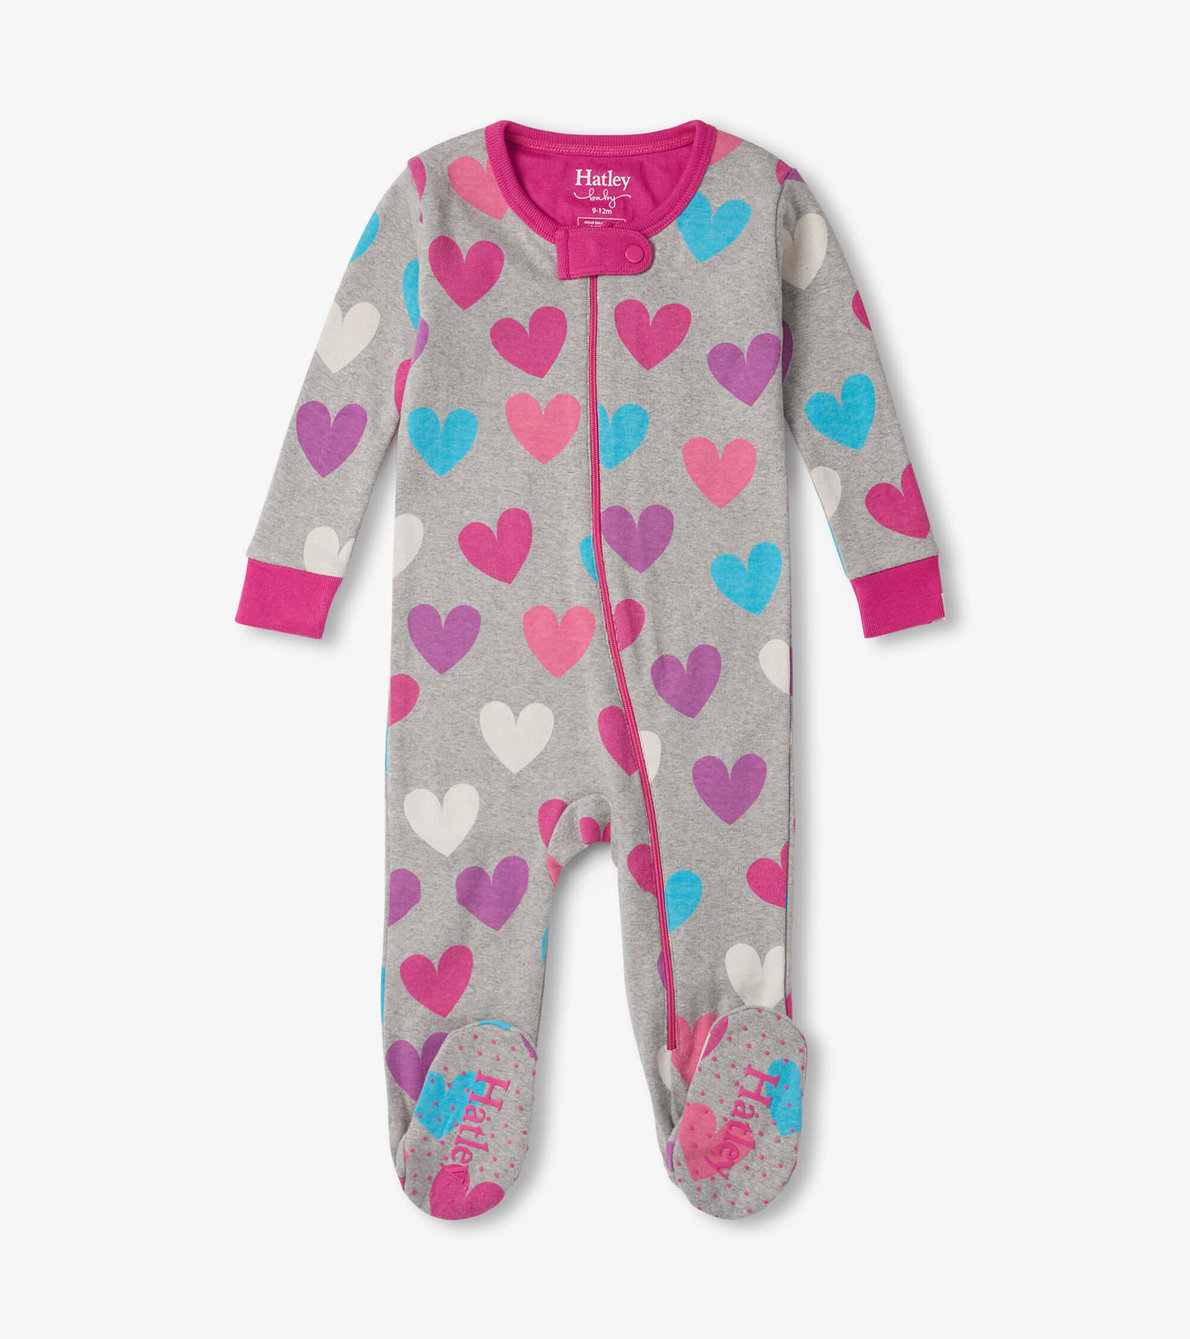 View larger image of Fun Hearts Baby Footed Sleeper